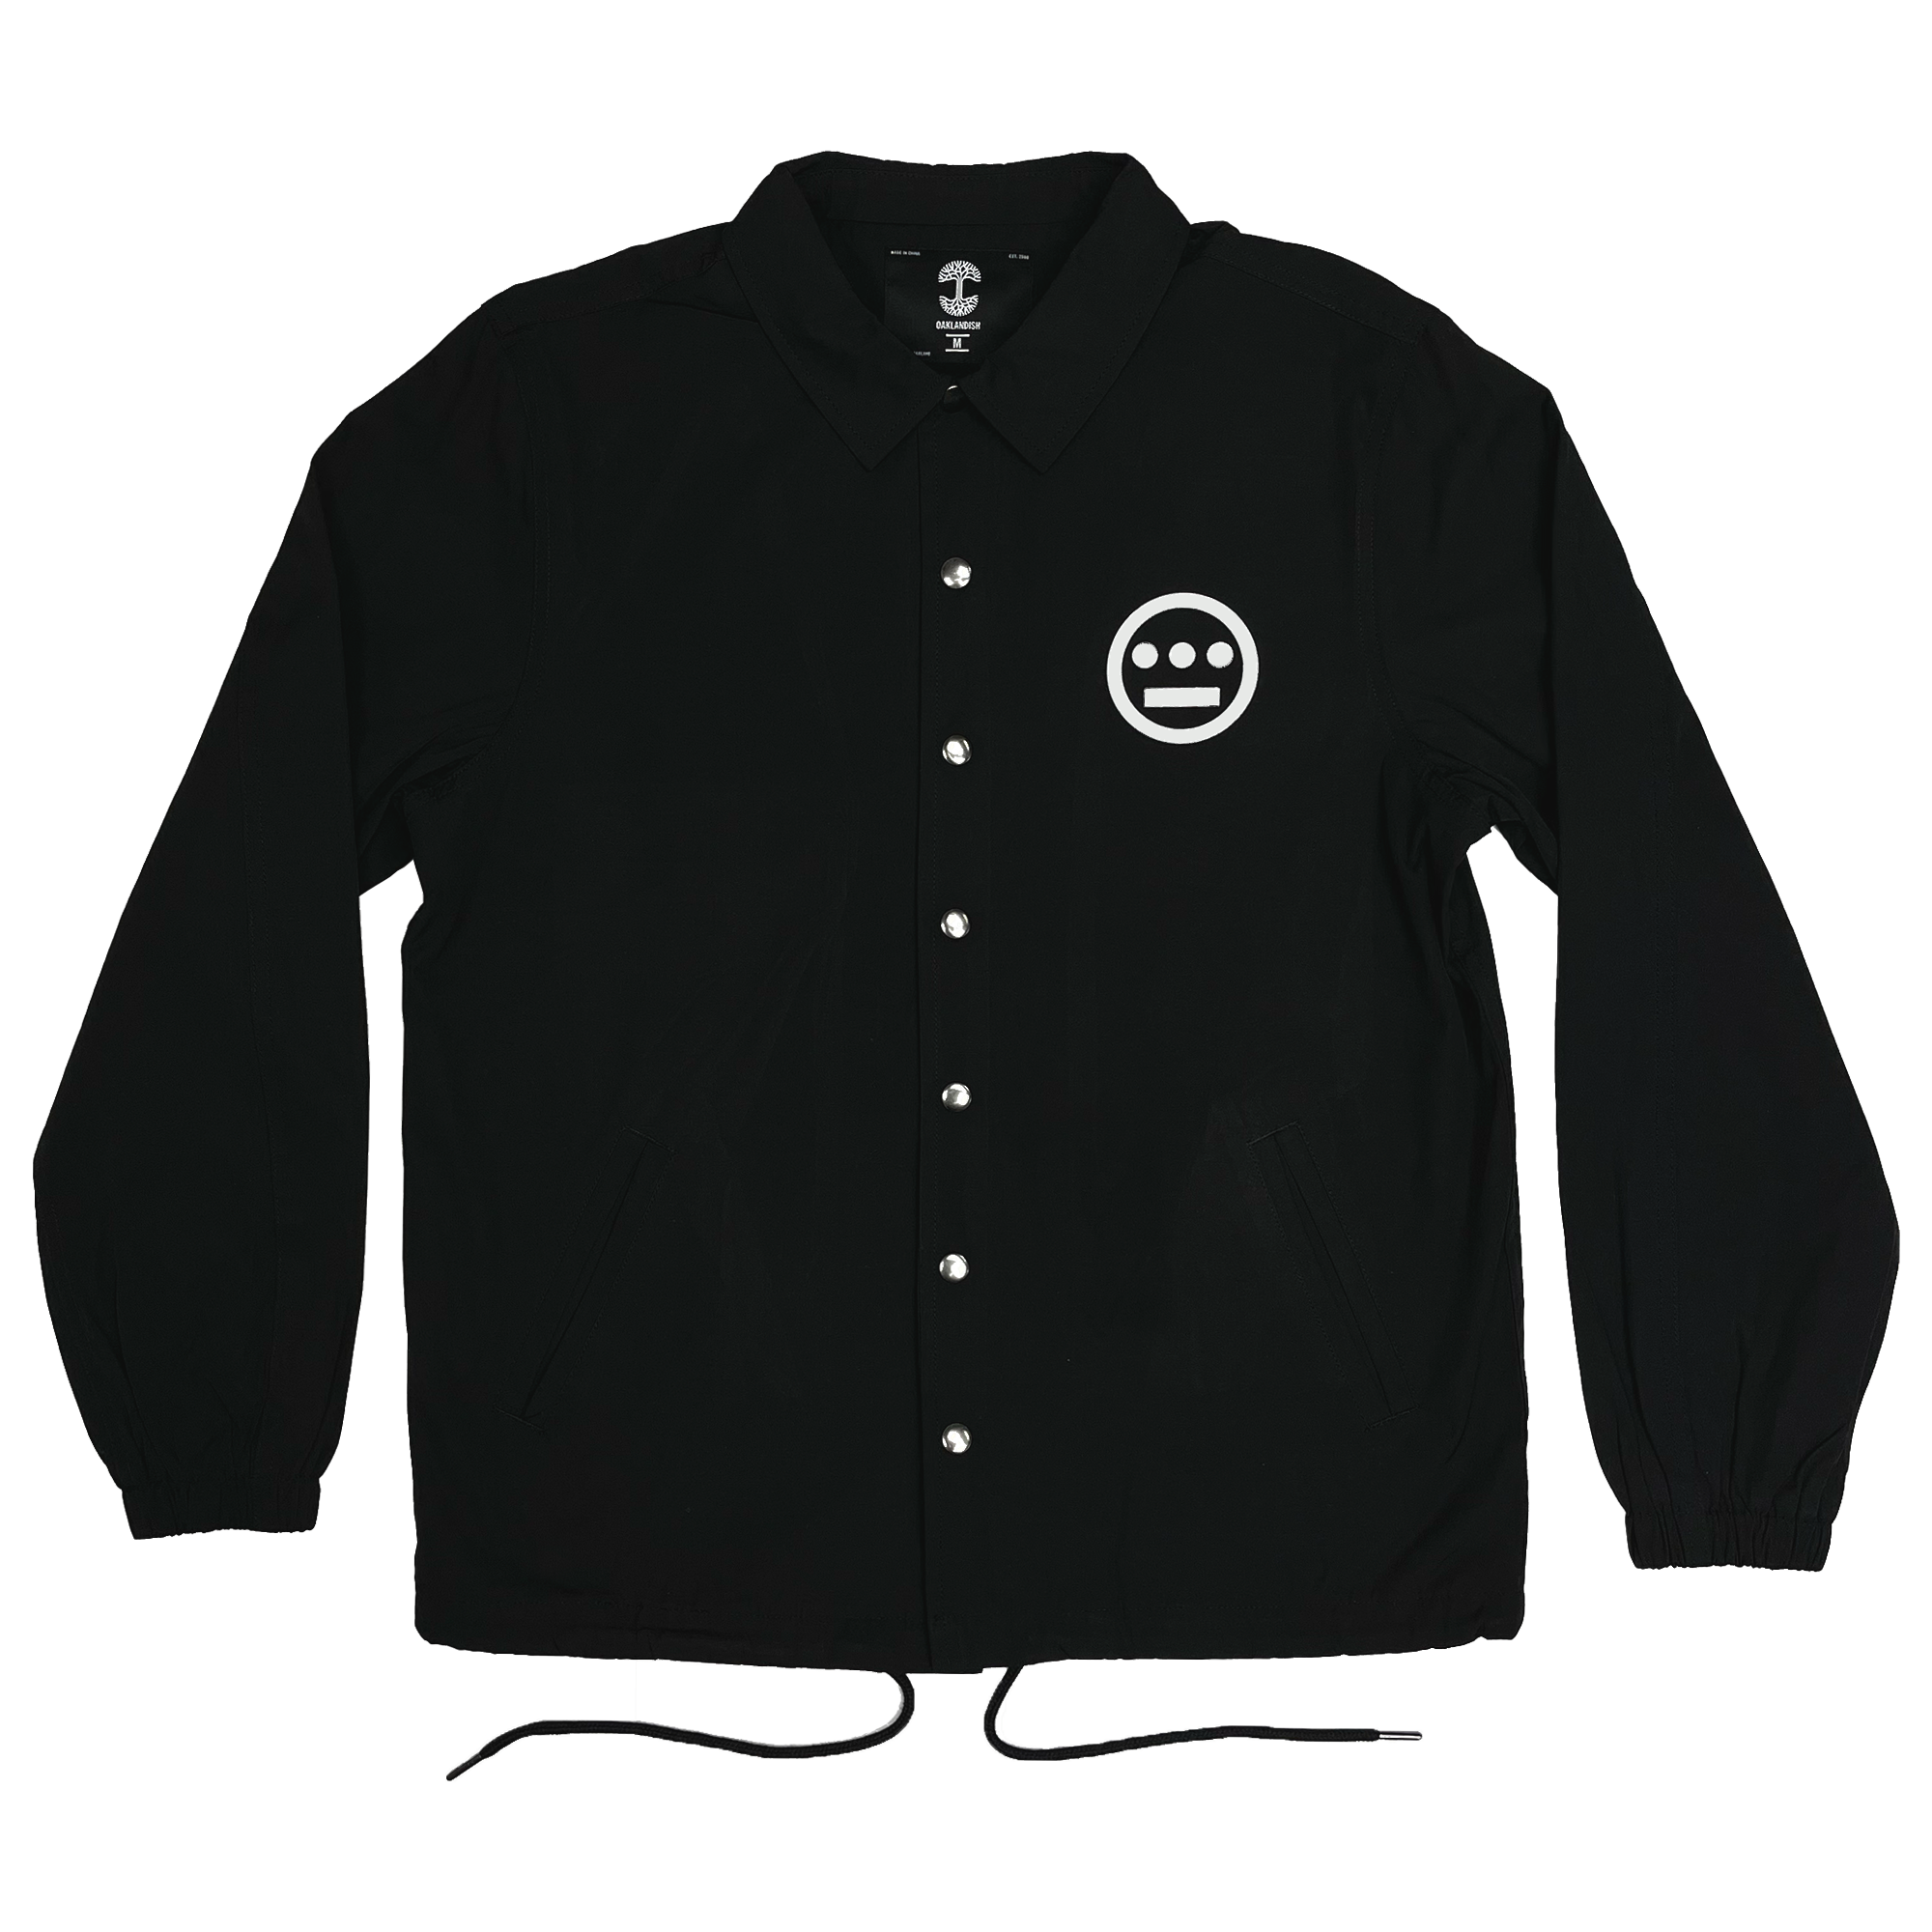 Black coaches jacket with snap closure, collar, and drawstring waist and Hiero logo printed in white on front left chest.